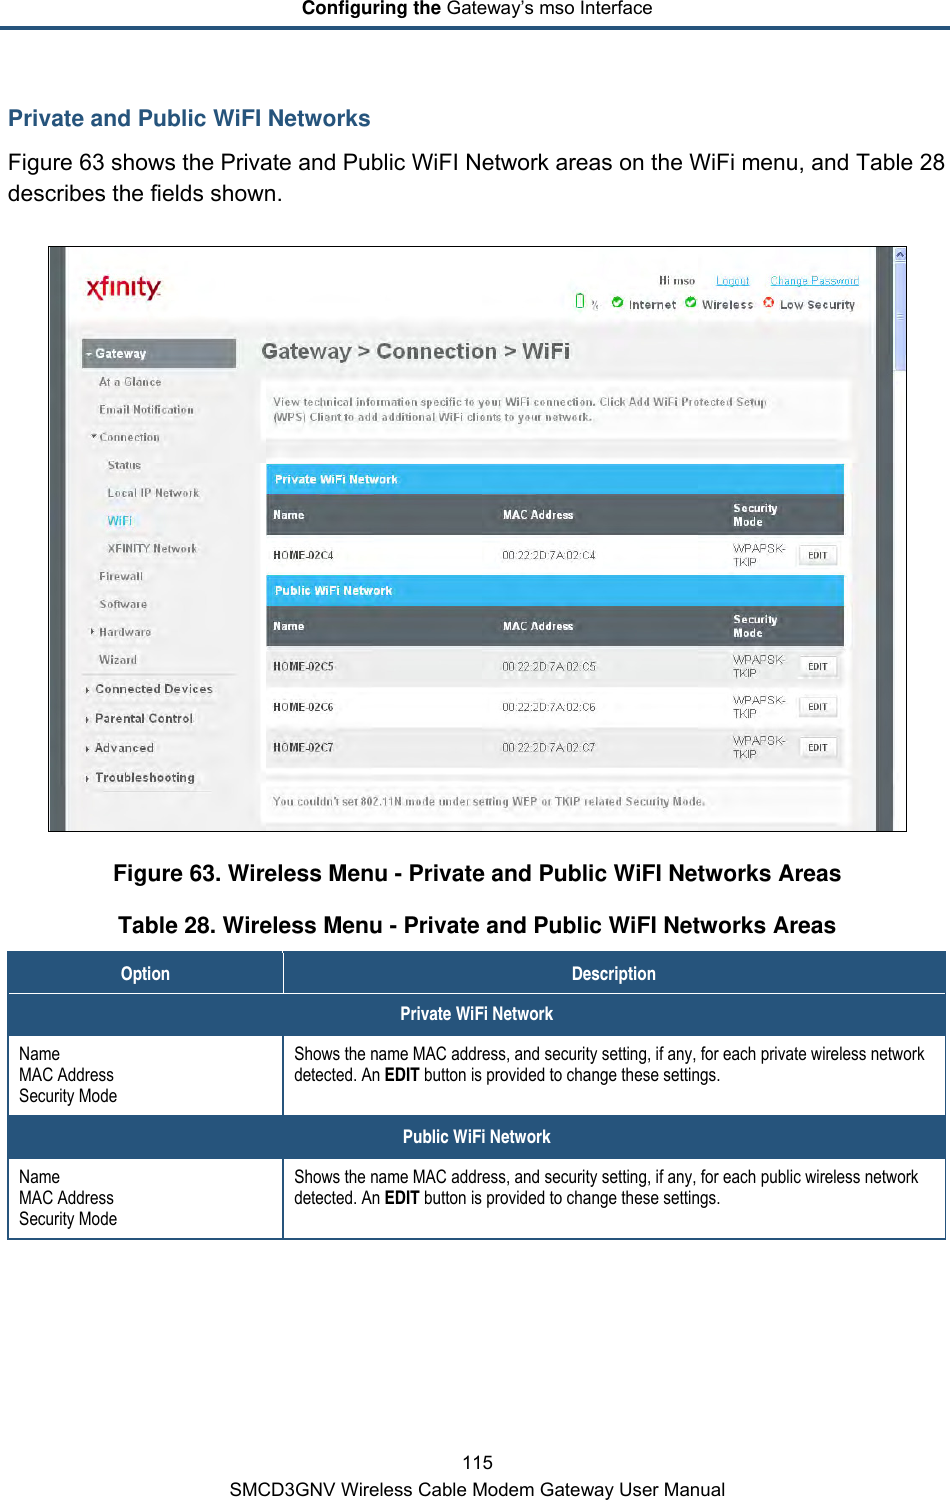 Configuring the Gateway’s mso Interface 115 SMCD3GNV Wireless Cable Modem Gateway User Manual Private and Public WiFI Networks Figure 63 shows the Private and Public WiFI Network areas on the WiFi menu, and Table 28 describes the fields shown.  Figure 63. Wireless Menu - Private and Public WiFI Networks Areas Table 28. Wireless Menu - Private and Public WiFI Networks Areas Option Description Private WiFi Network Name MAC Address Security Mode Shows the name MAC address, and security setting, if any, for each private wireless network detected. An EDIT button is provided to change these settings. Public WiFi Network Name MAC Address Security Mode Shows the name MAC address, and security setting, if any, for each public wireless network detected. An EDIT button is provided to change these settings.     